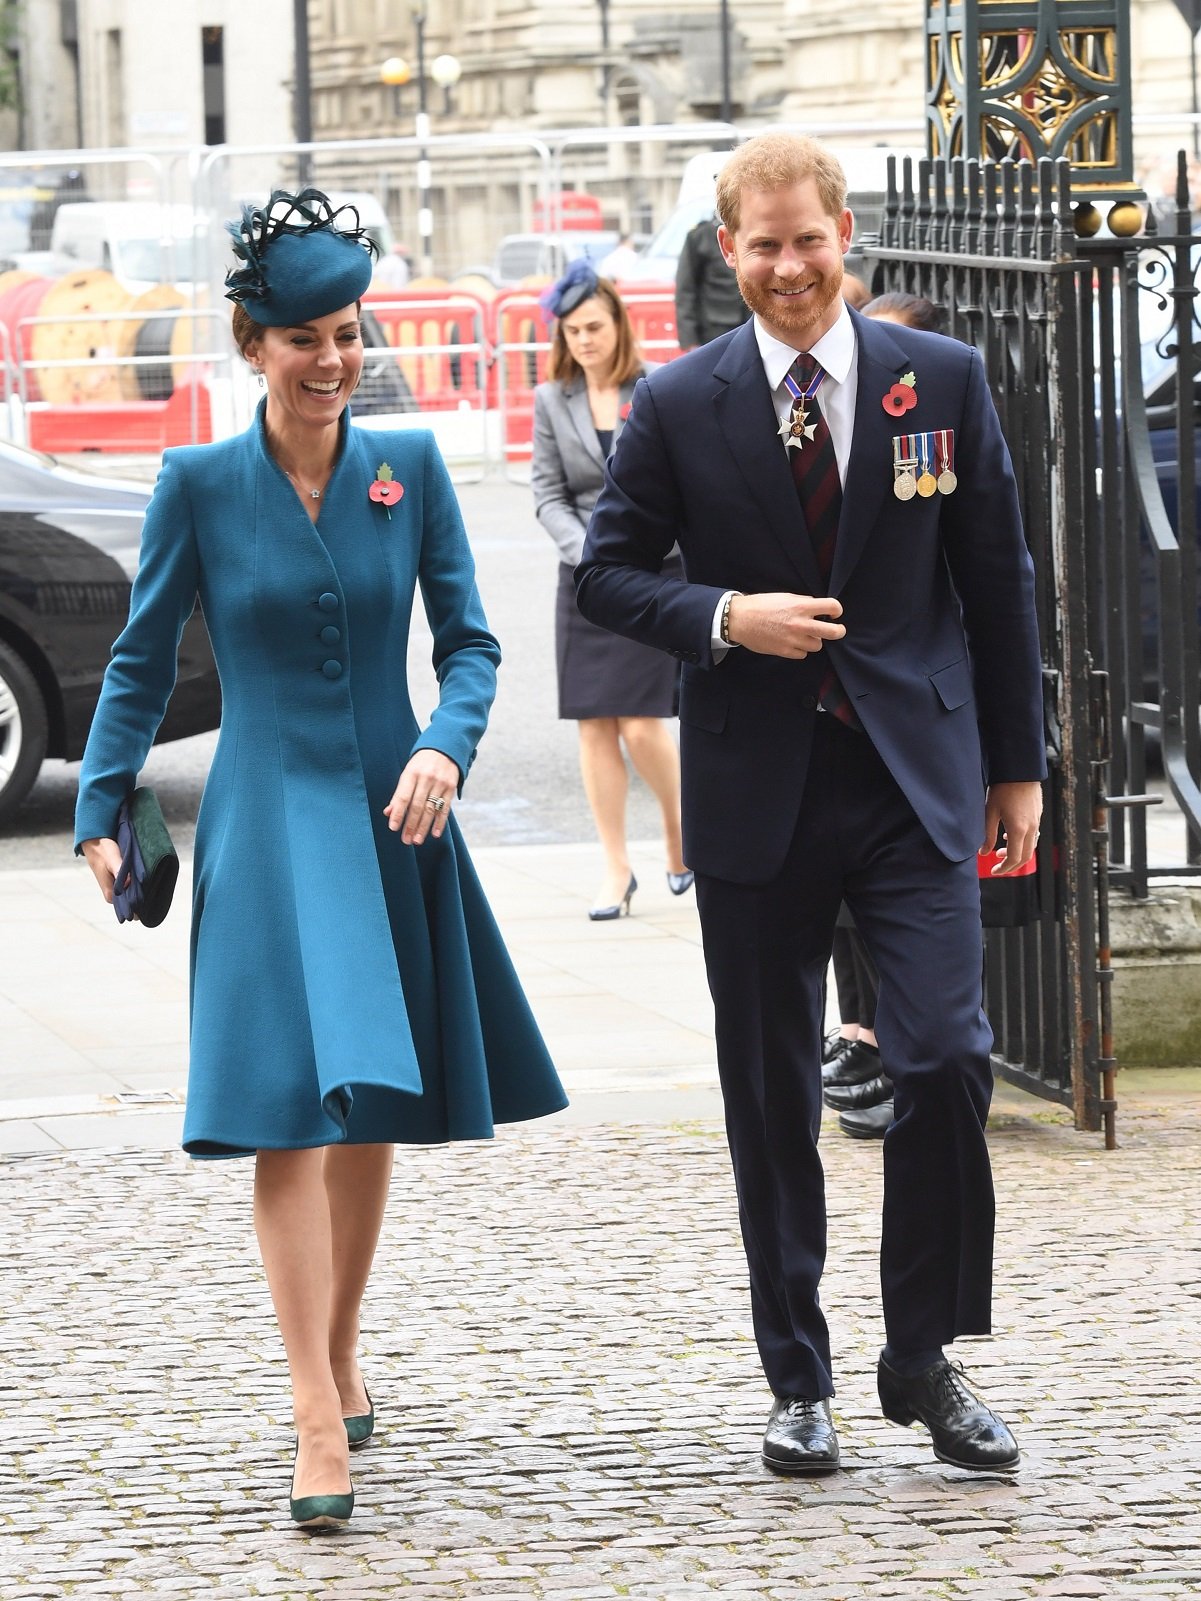 Kate Middleton and Prince Harry laughing together as they walk into Westminster Abbey for an event in 2019